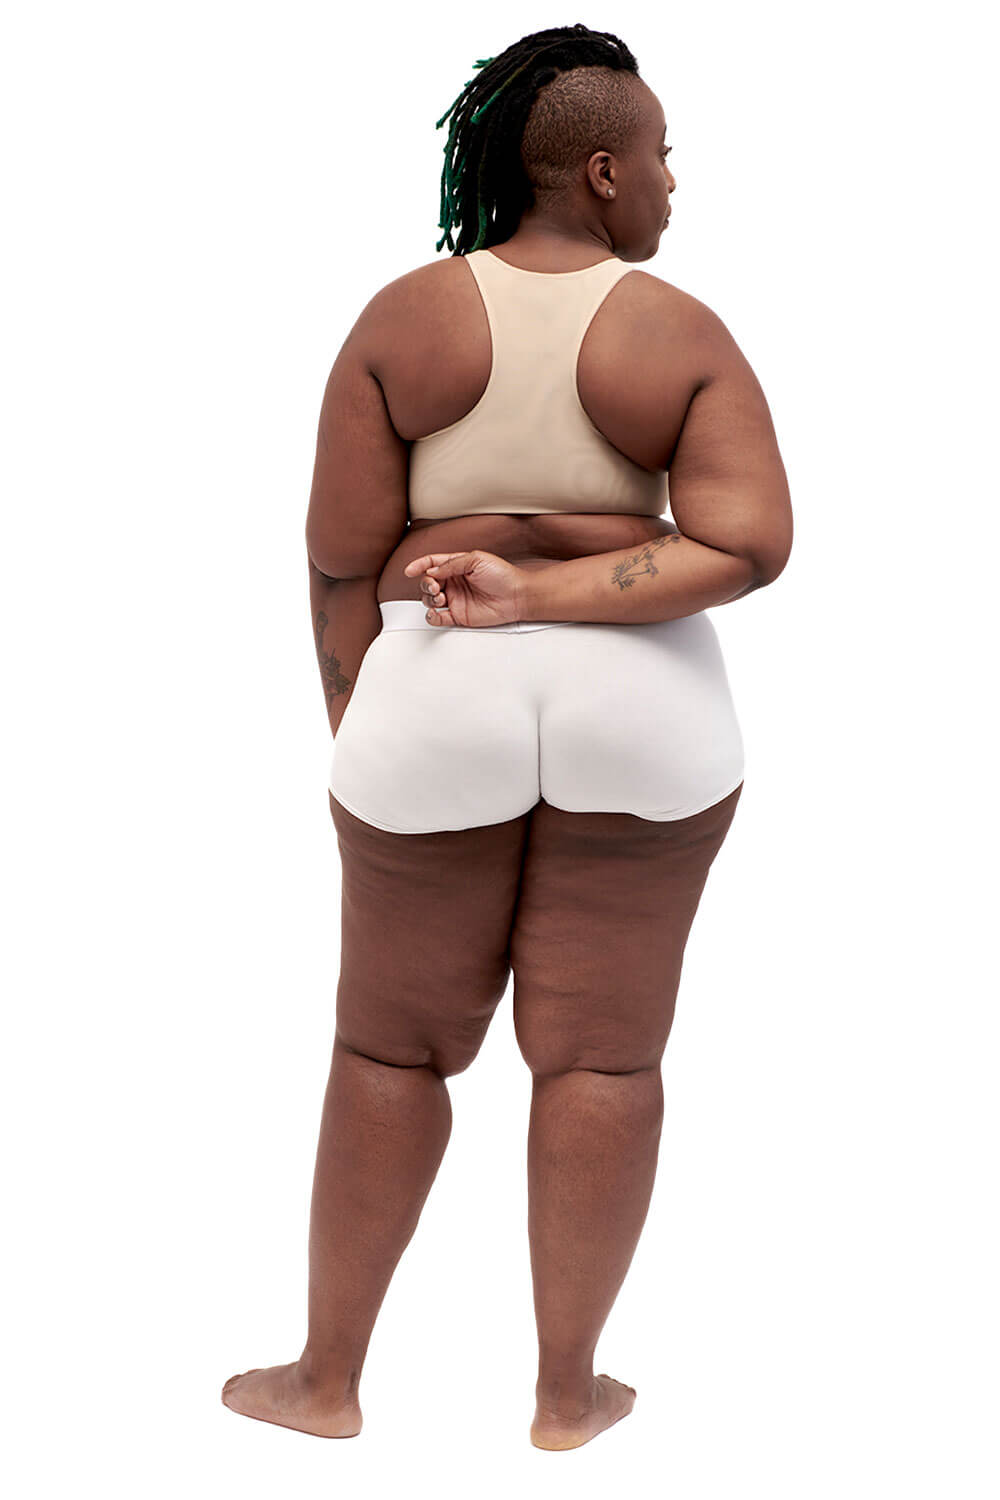 Plus-sized person wearing a nude racerback side-open chest binder made from breathable mesh, photographed from the back.